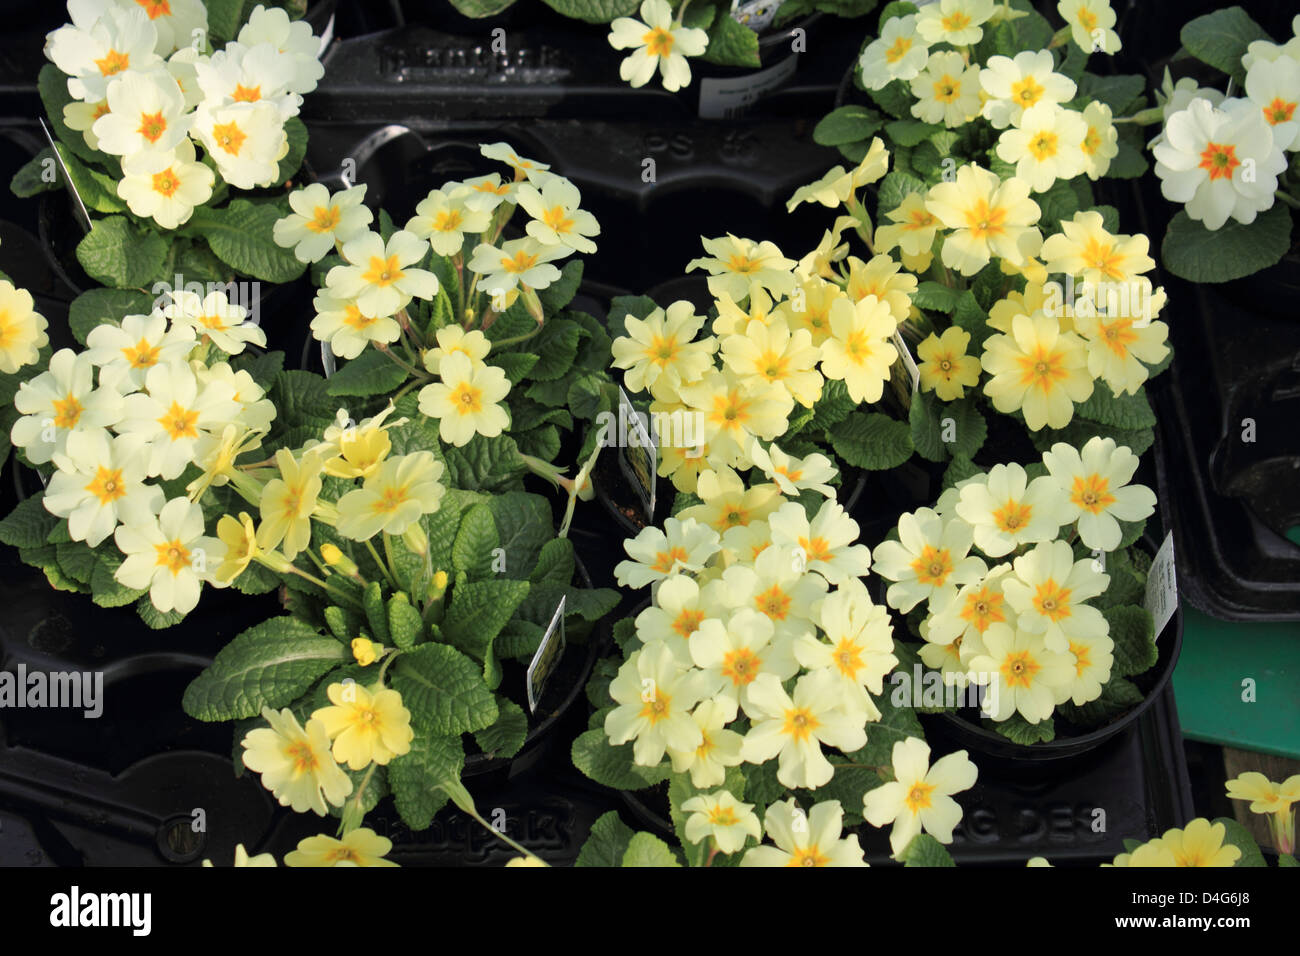 Potted primulas for sale. Spring bedding plants at a garden centre, Surrey England UK. Stock Photo